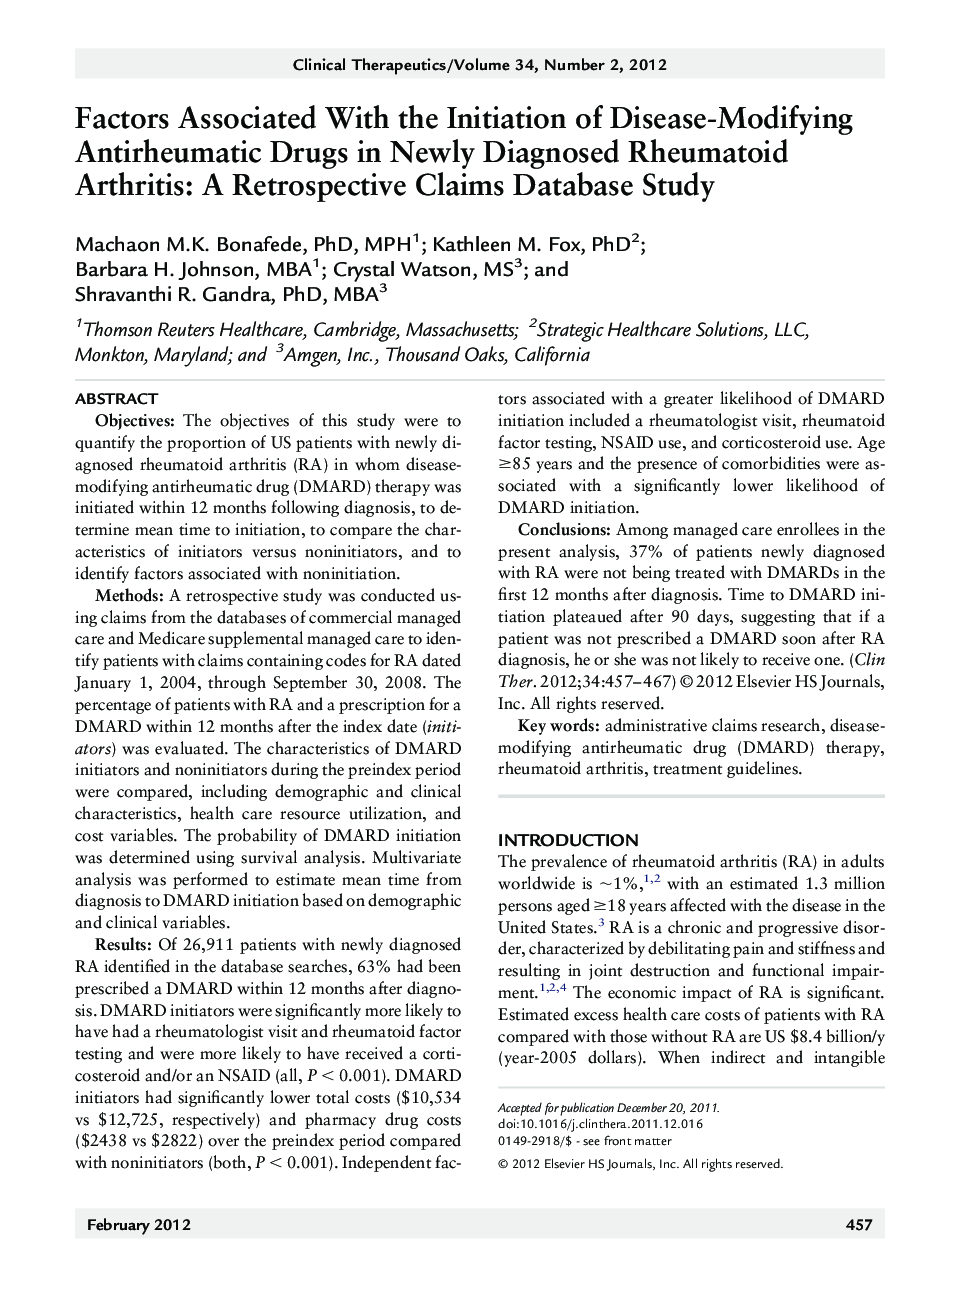 Factors Associated With the Initiation of Disease-Modifying Antirheumatic Drugs in Newly Diagnosed Rheumatoid Arthritis: A Retrospective Claims Database Study